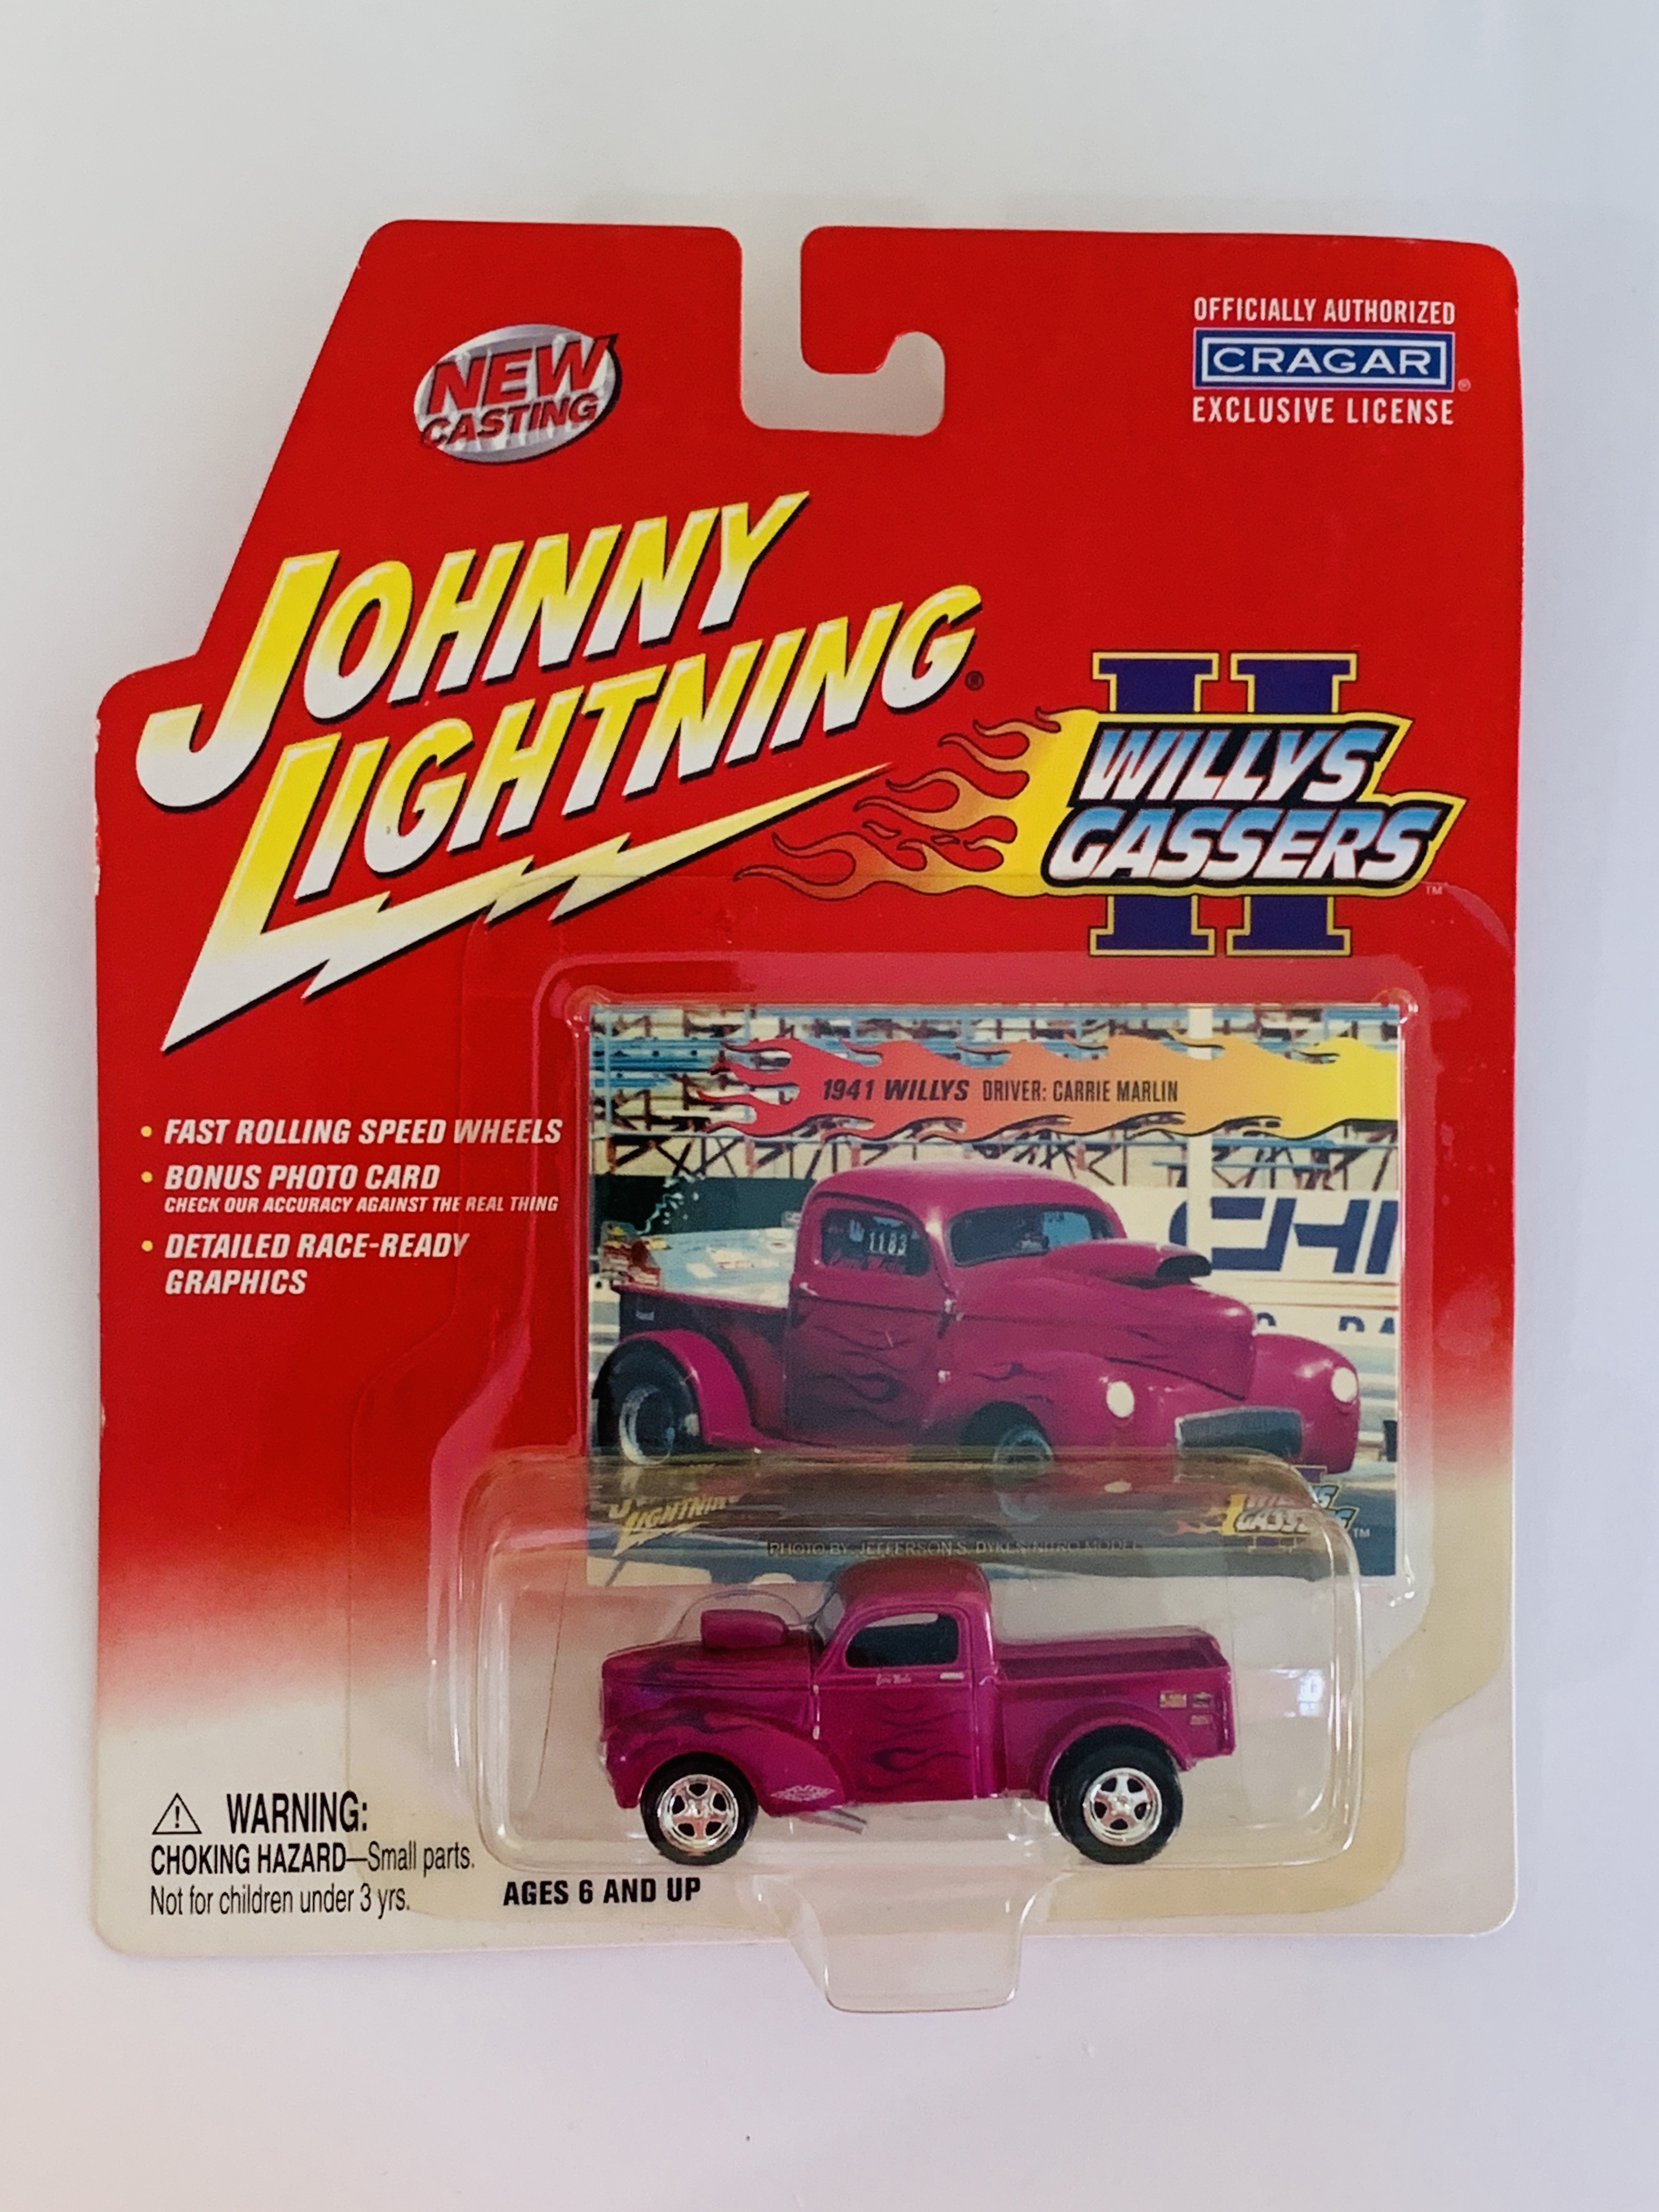 Johnny Lightning Willys Gassers II 1941 Willys Carrie Marlin